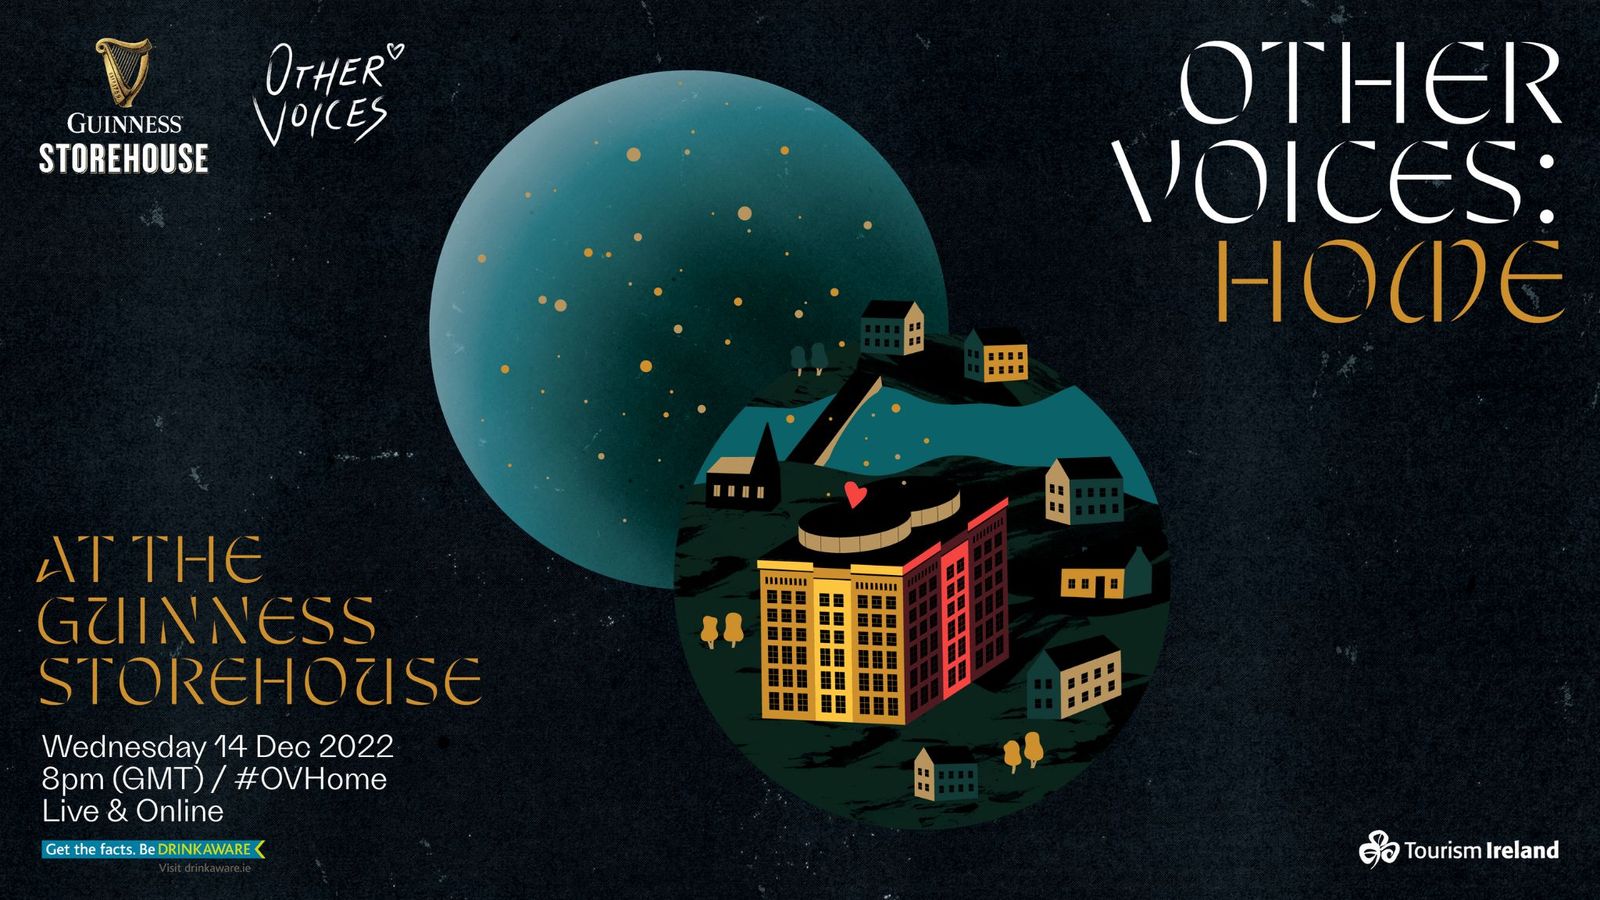 Other Voices: Home at the Guinness Storehouse 2022